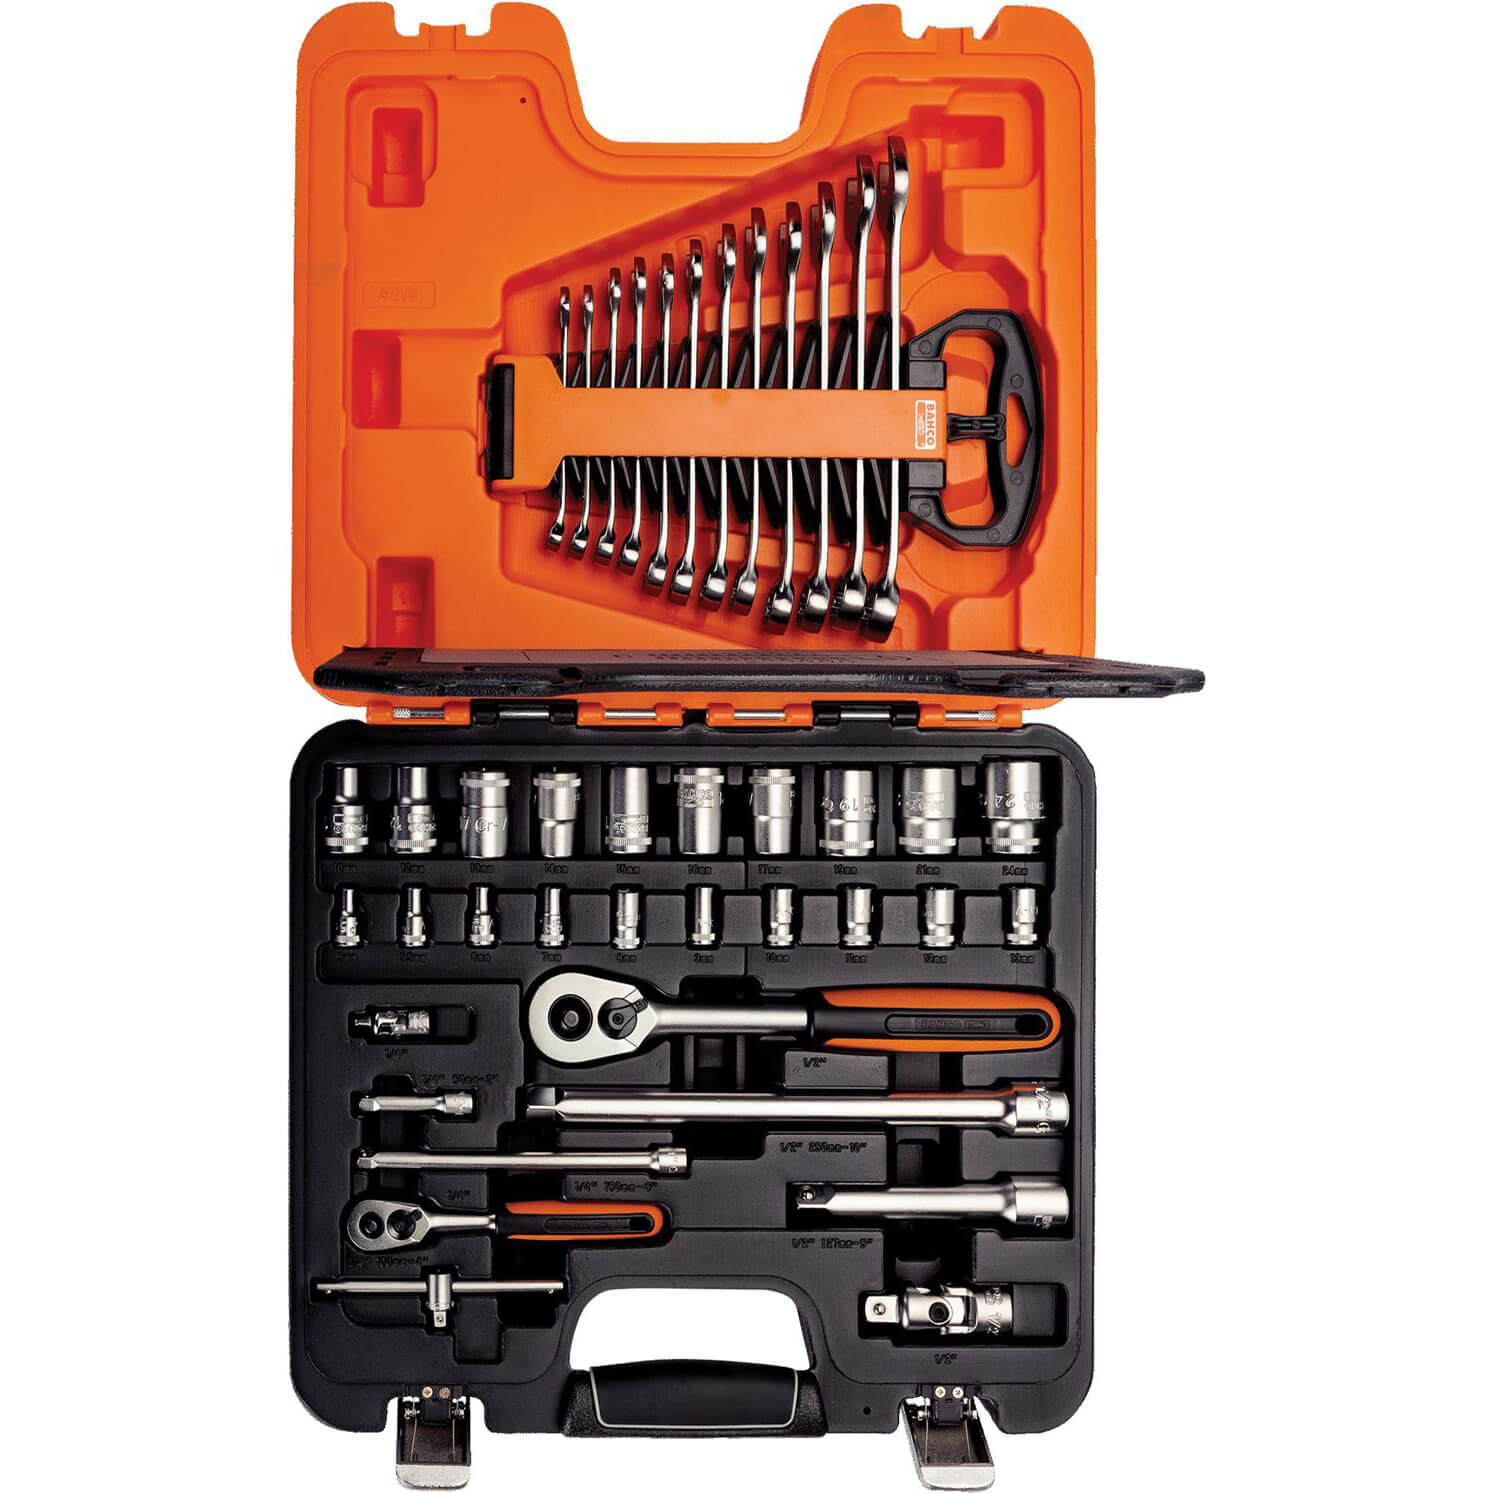 Bahco 41 Piece Combination Drive Hex Socket and Spanner Set Metric Combination